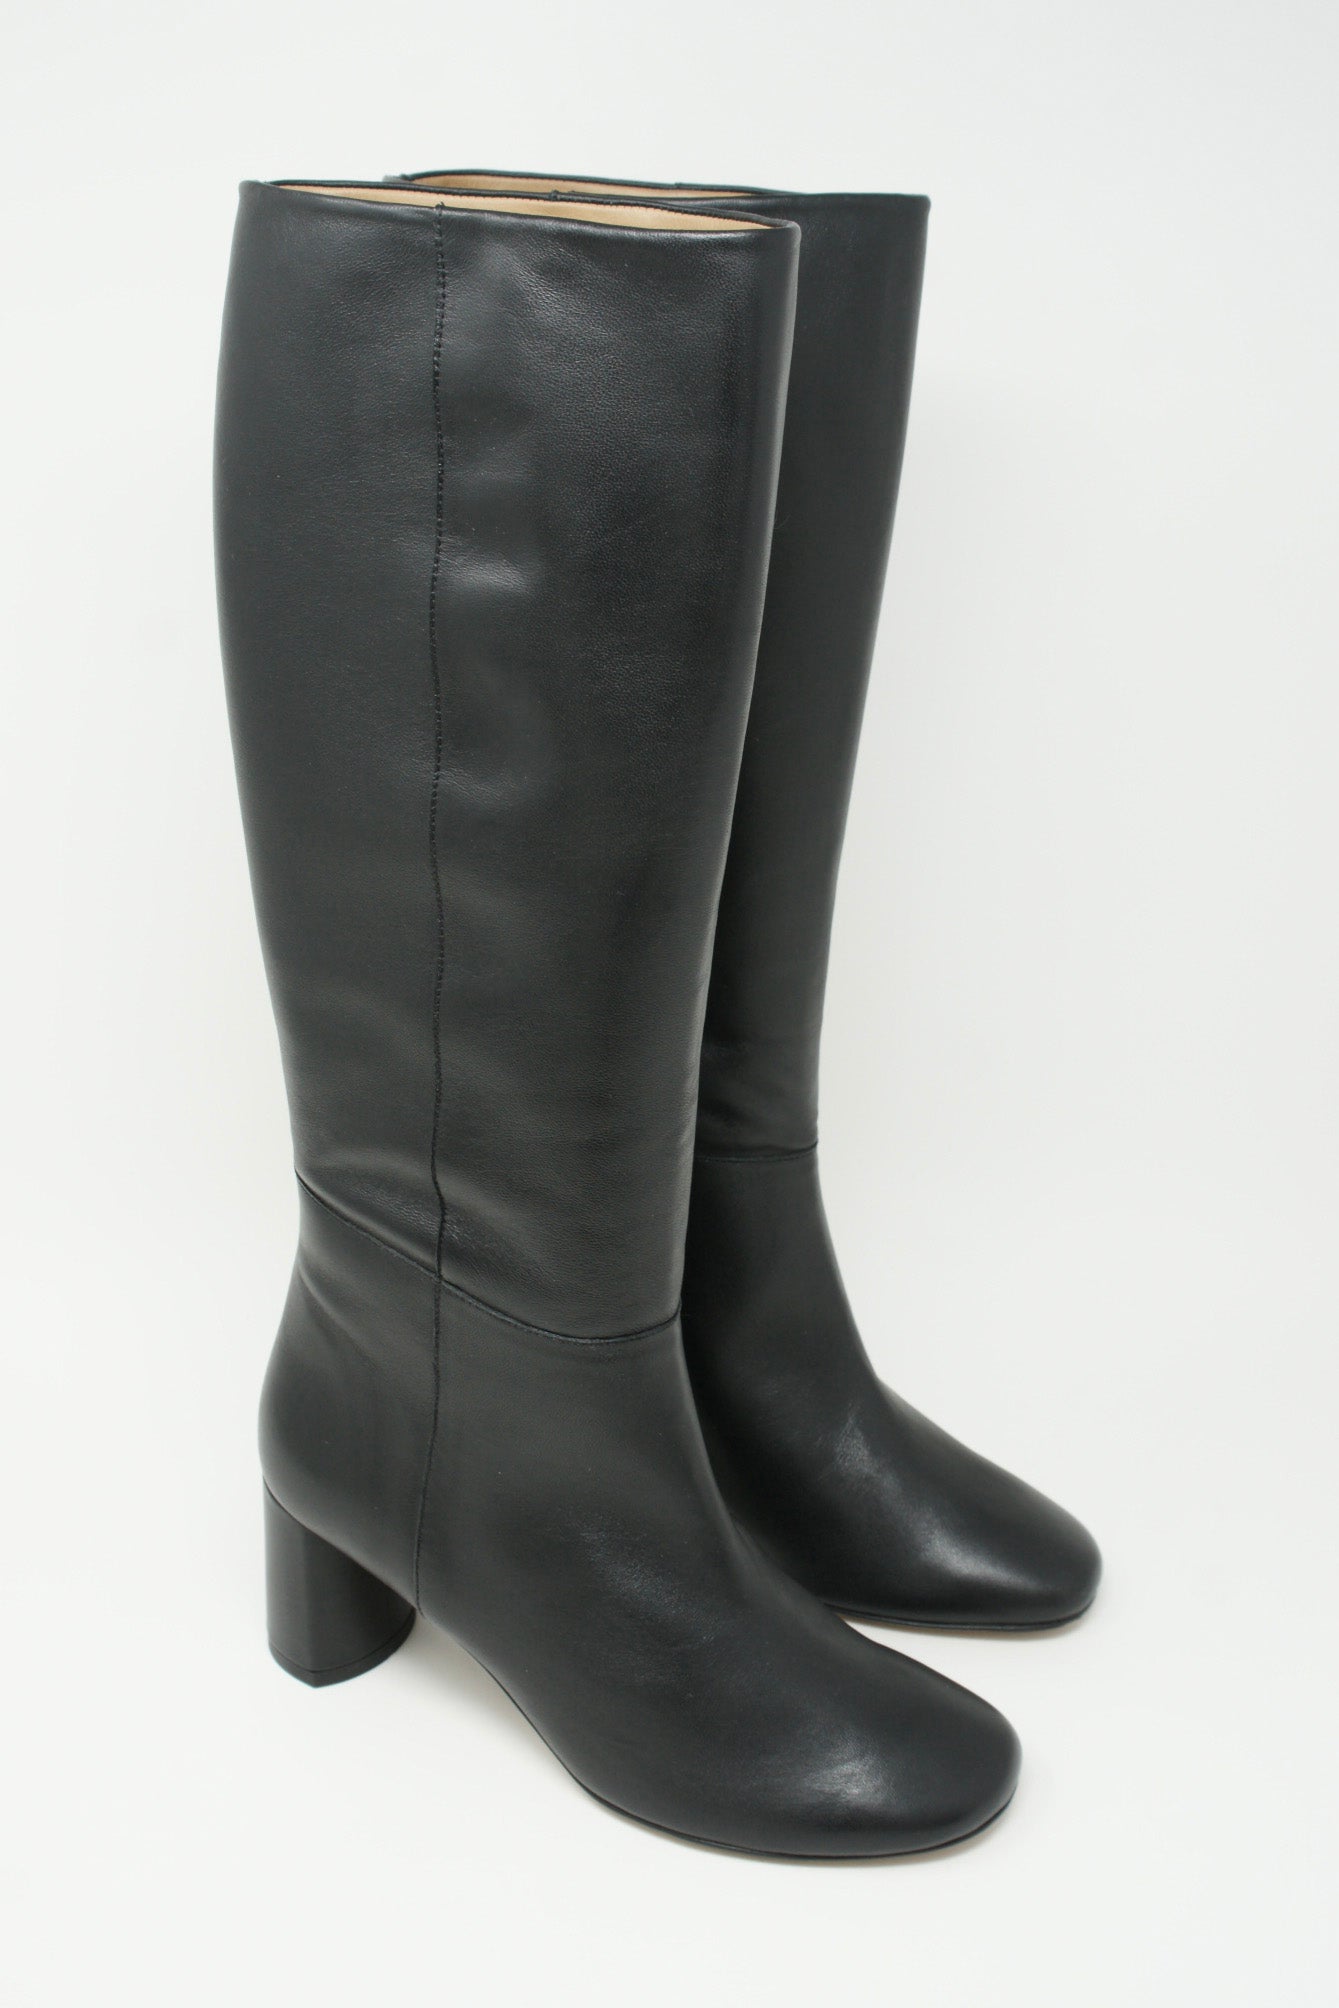 A pair of LOQ Donna Boots in Black on a white background.